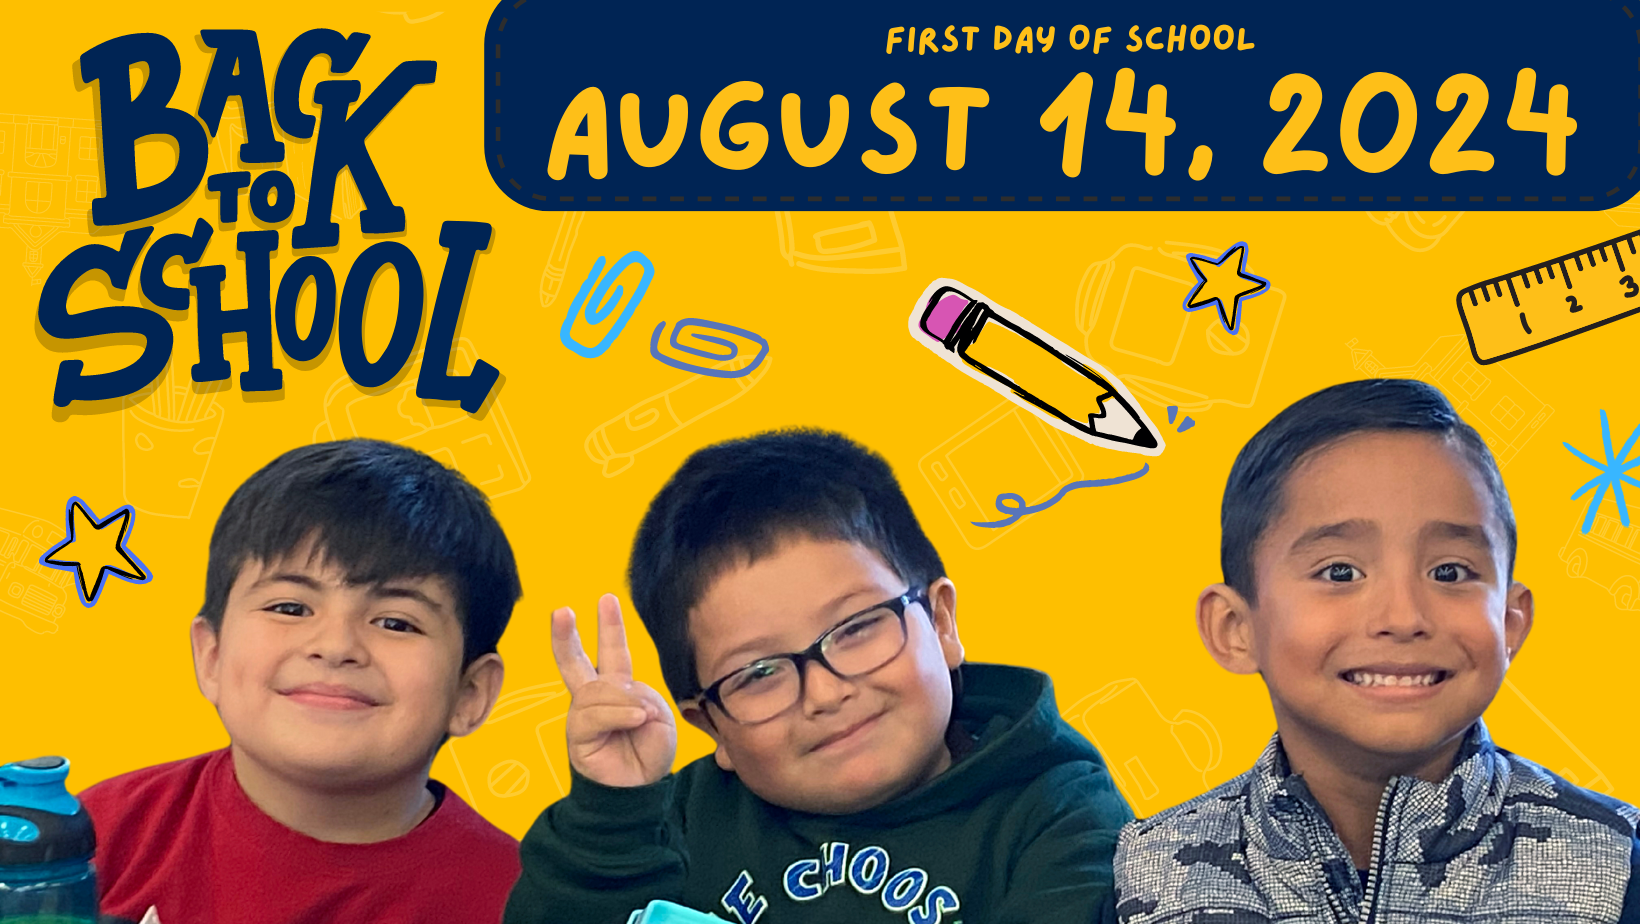 First day of school August 14, 2024; three young male students on bright yellow background